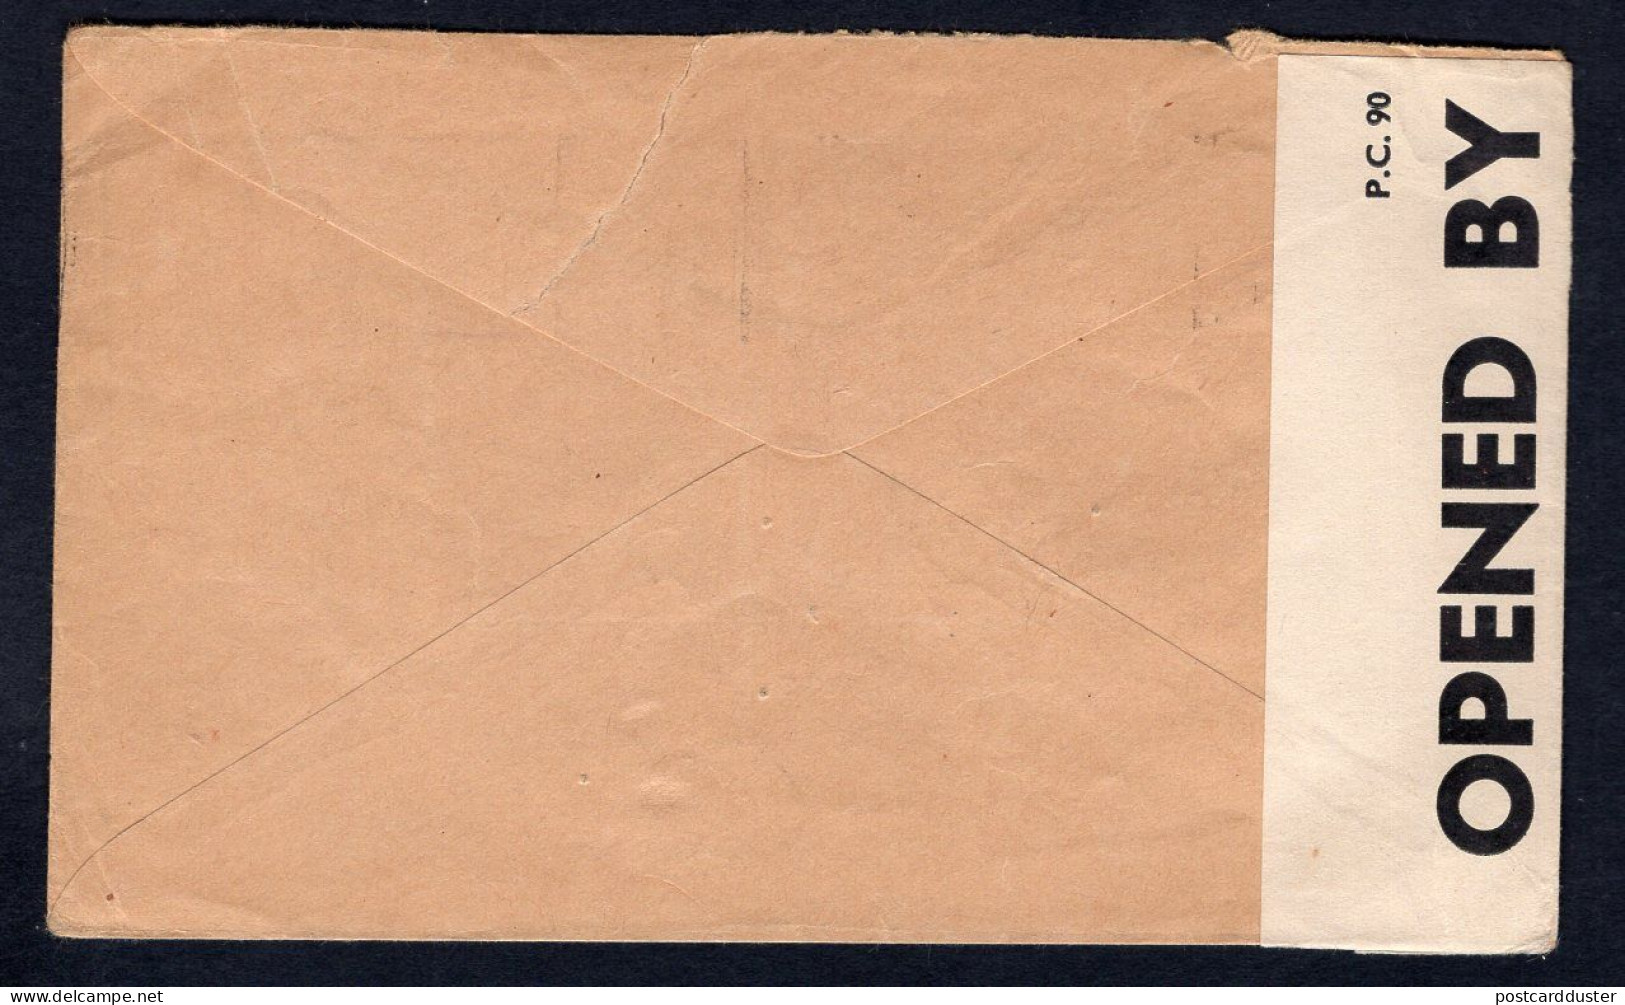 IRELAND 1941 Censored Cover To England. Slogan (p2717) - Lettres & Documents